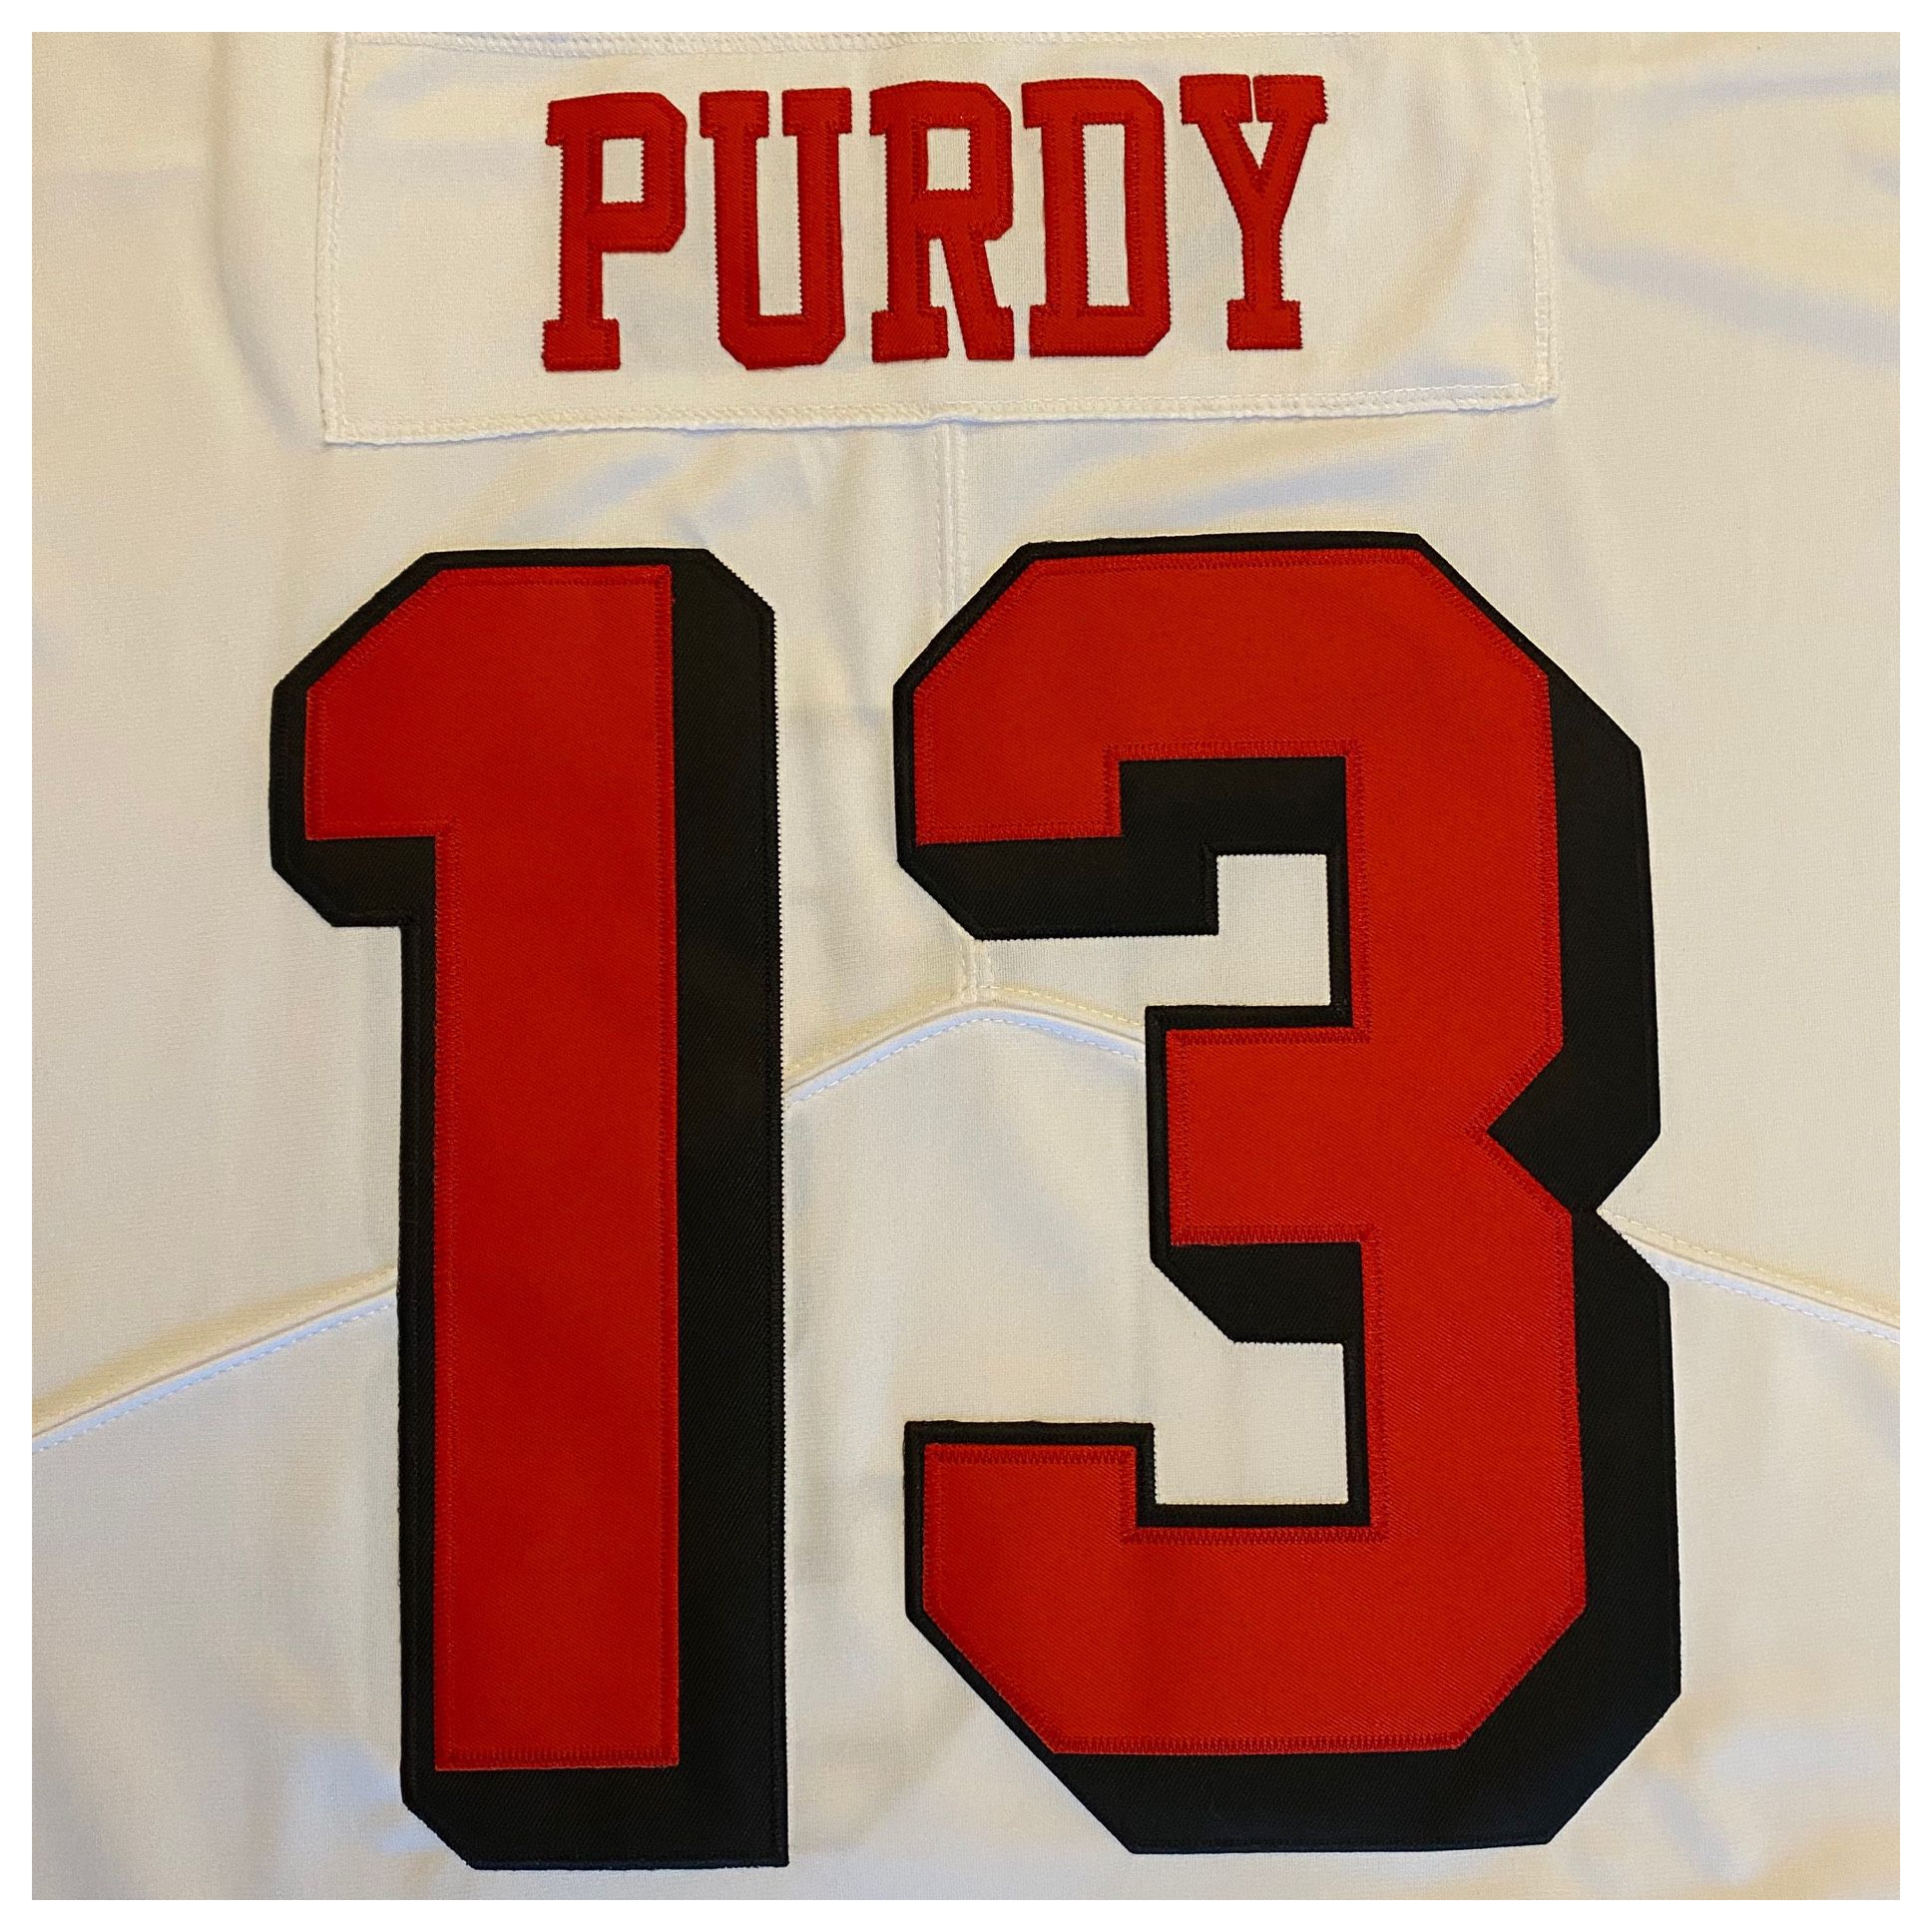 BROCK PURDY - Black 49ers Design T-Shirt for Sale in Oakland, CA - OfferUp